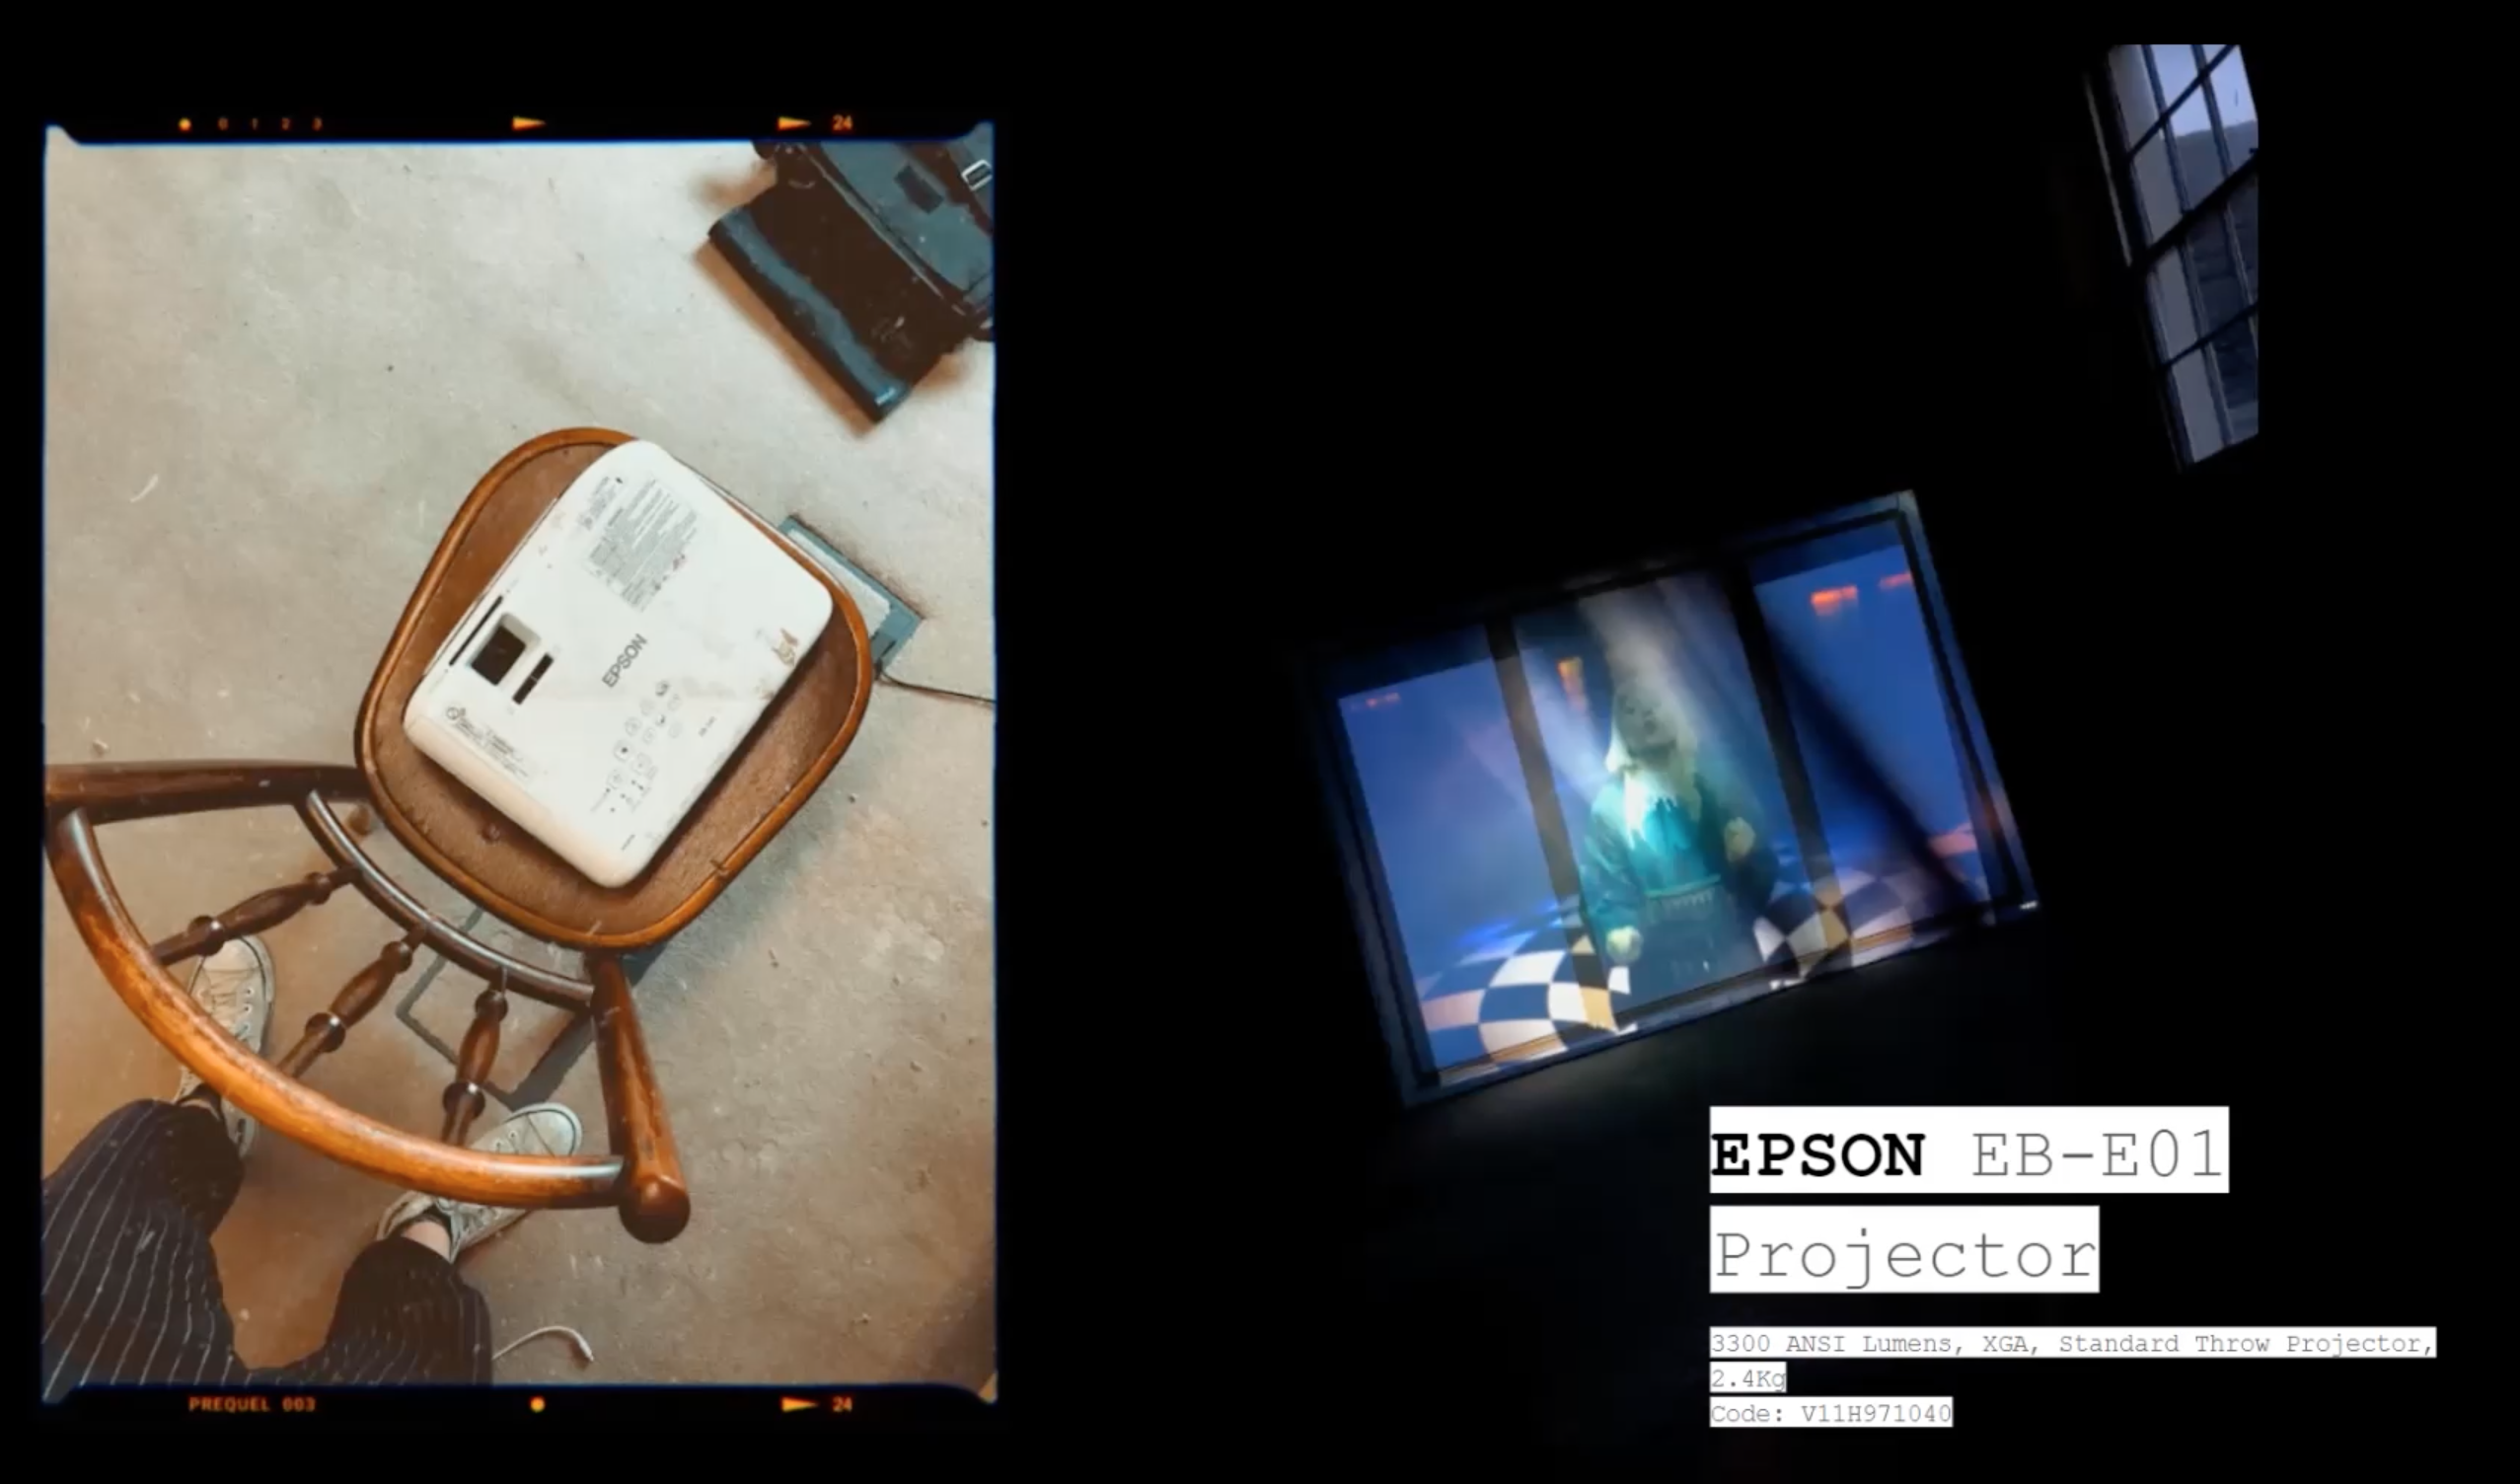 image of projector on a chair to the left and a projected image to the right